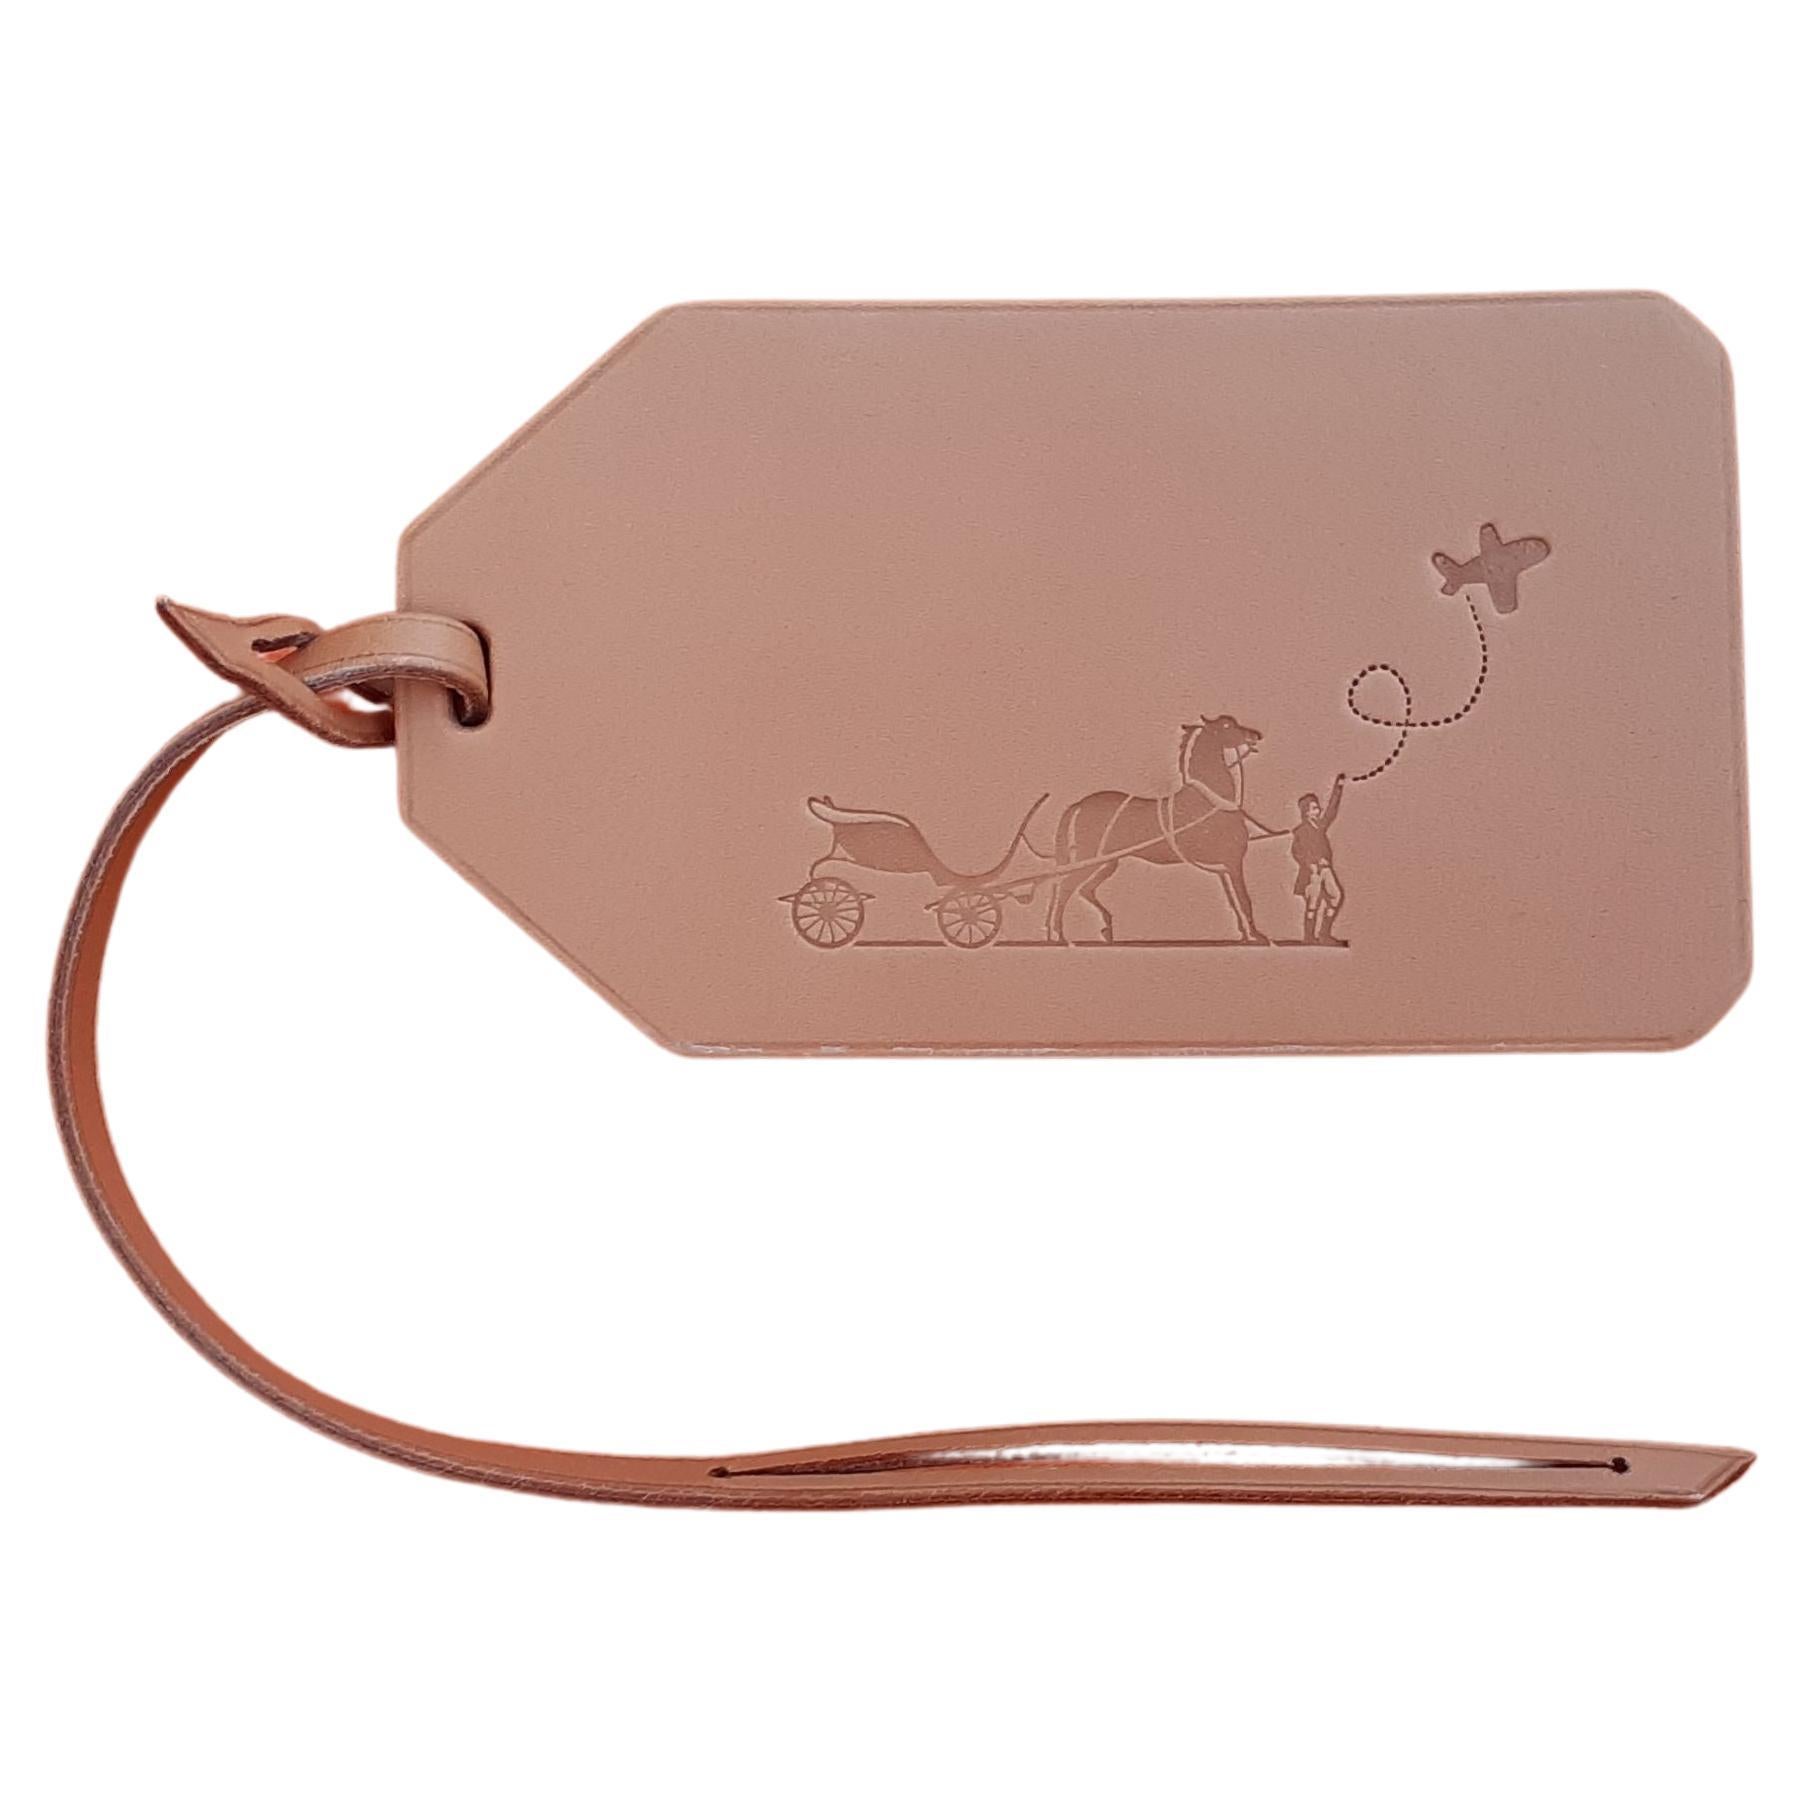 Hermès Address Tag for Luggage Suitcase in Naturel Leather